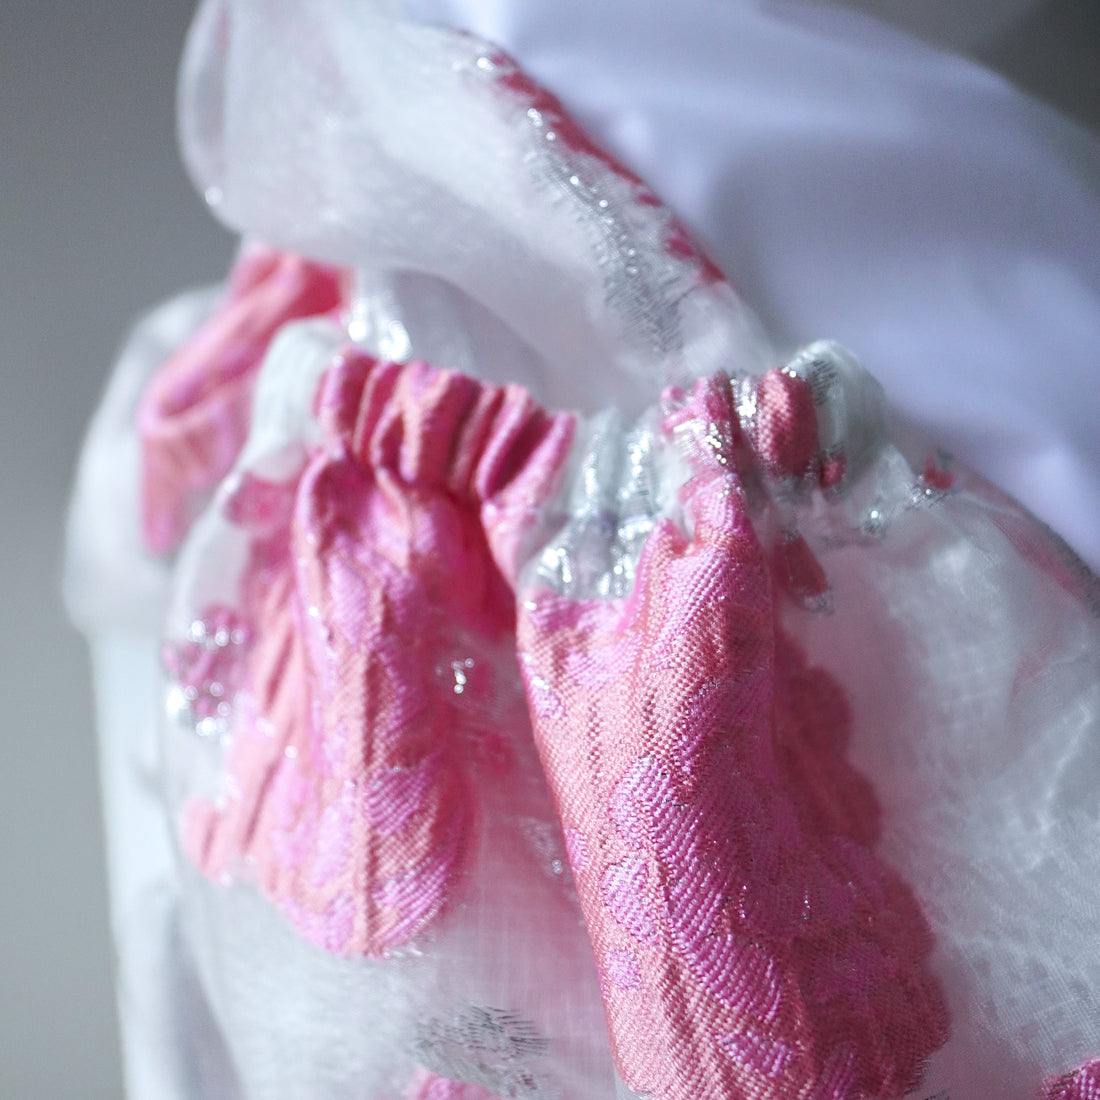 [Made to order] CALL TULLE GATHERED BACKPACK PINK